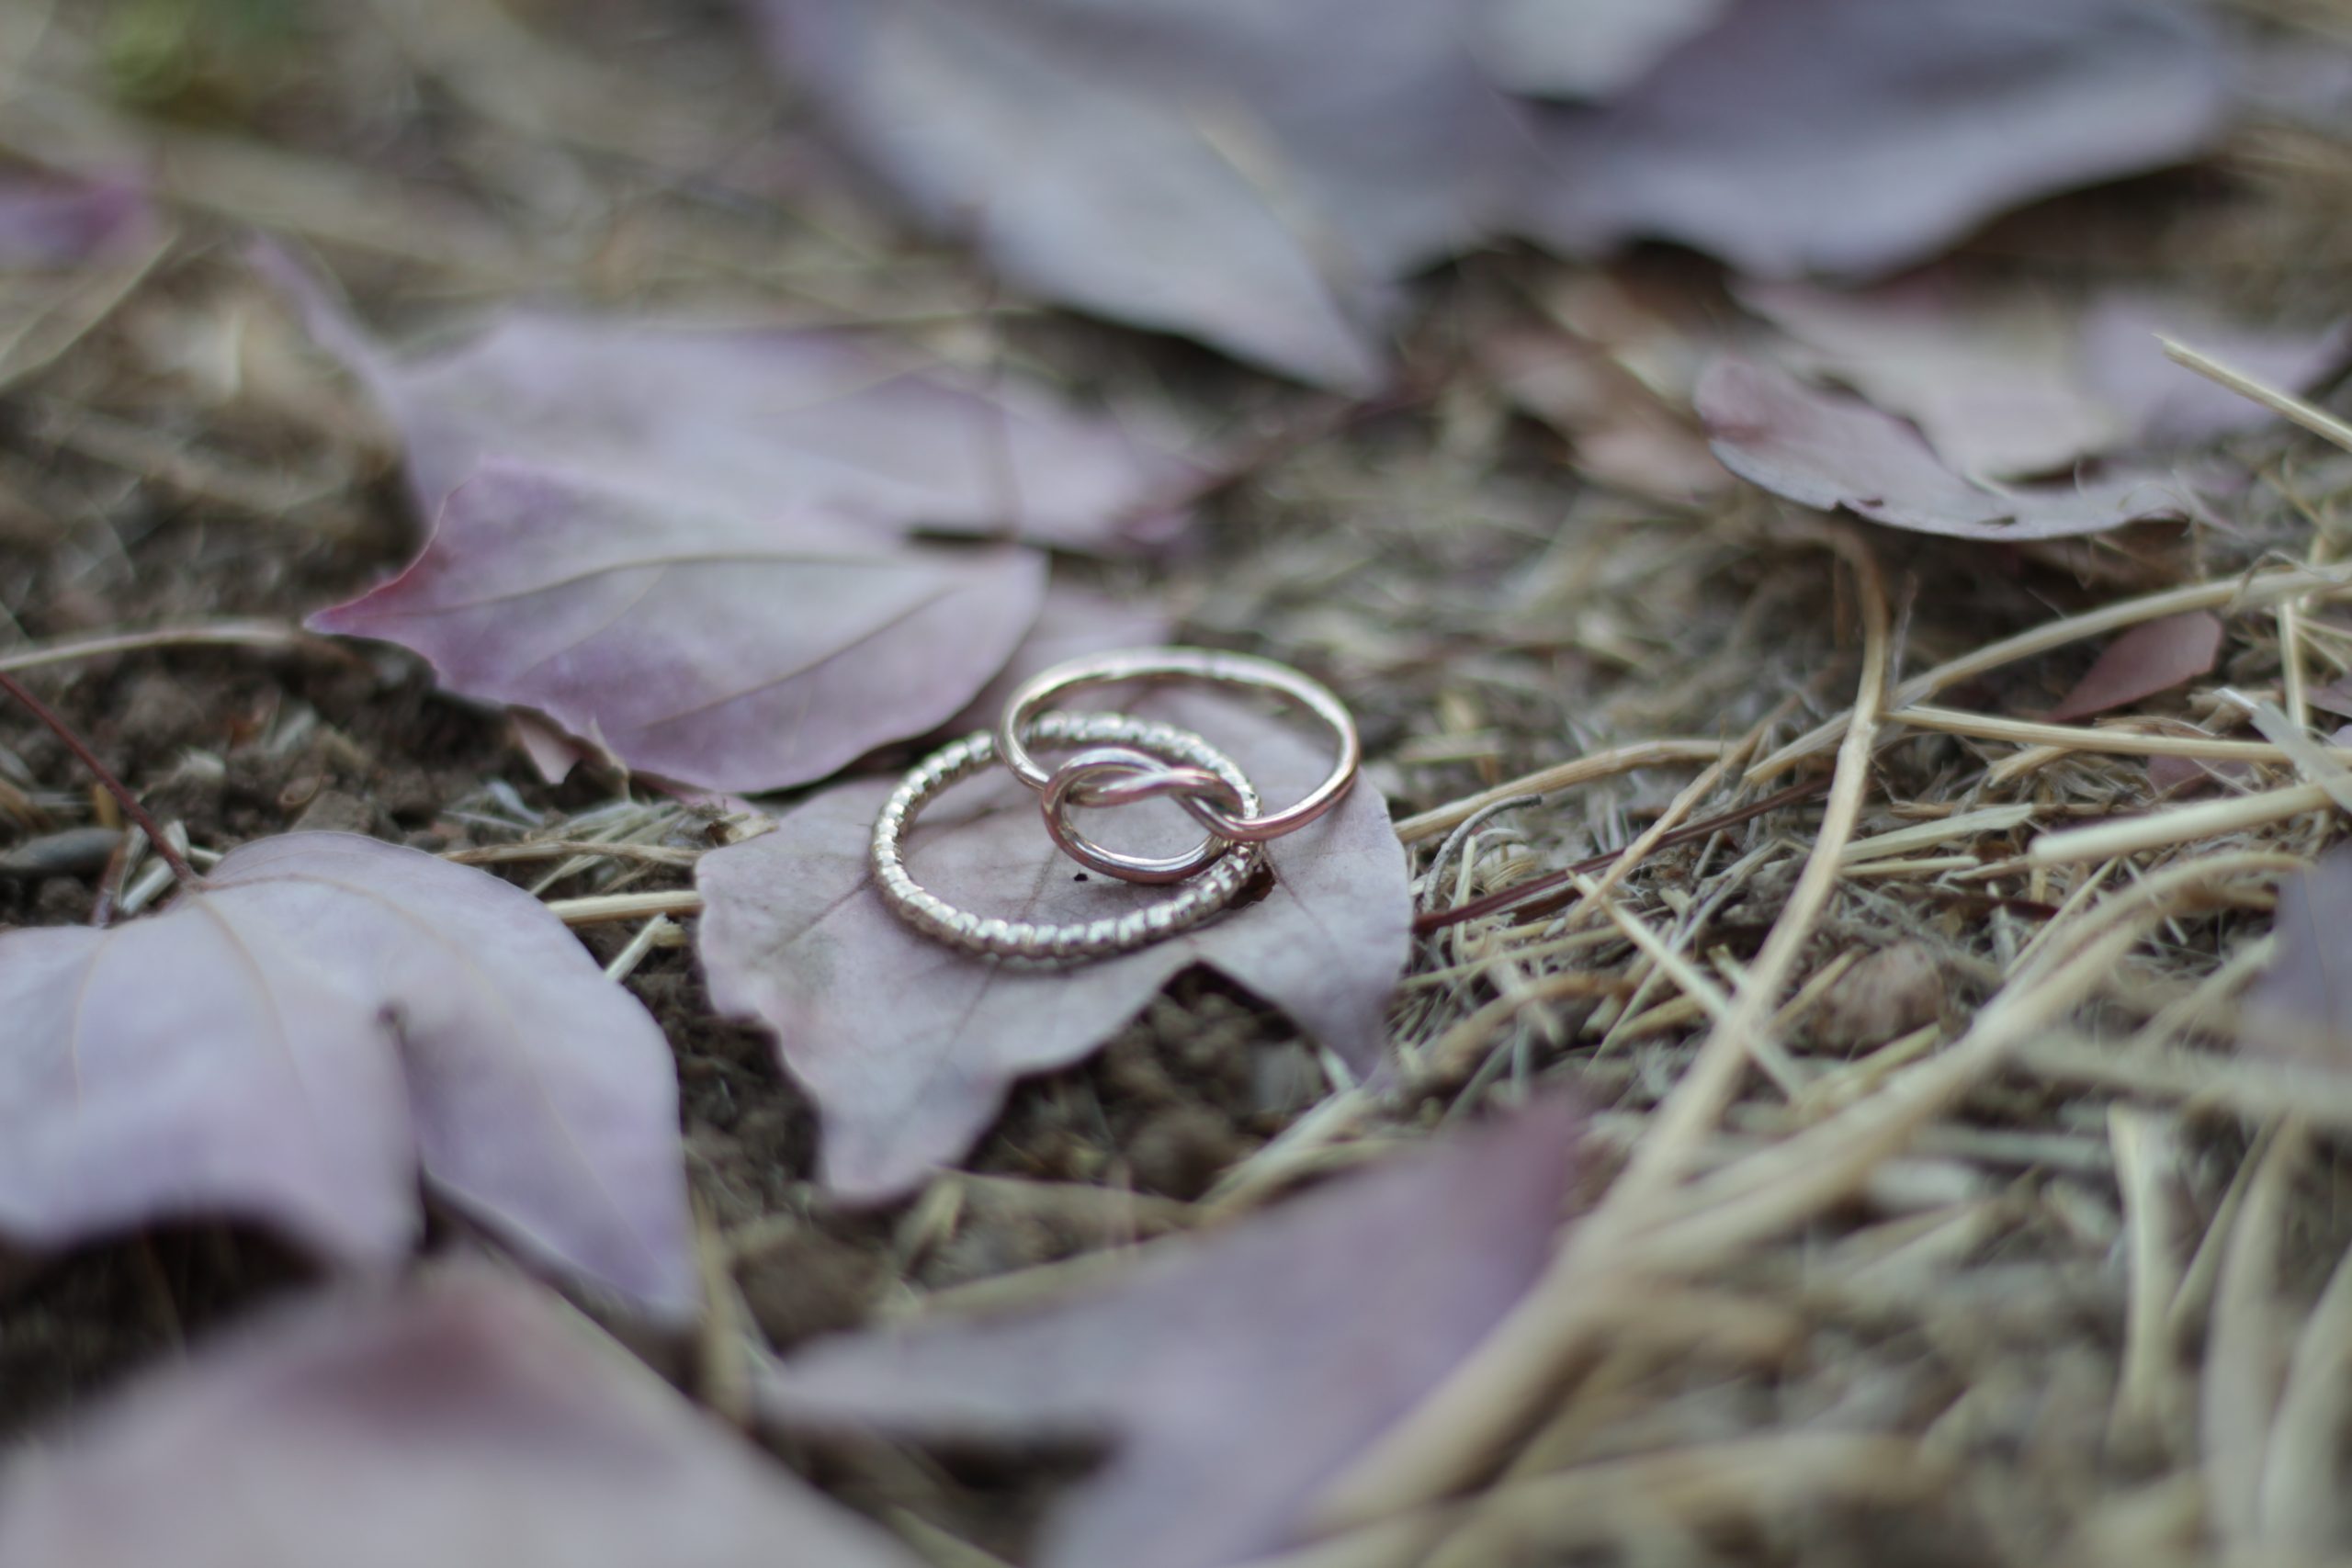 Photo of "Love Story". Photo shows two rings on some leaves on the ground of dirt. 